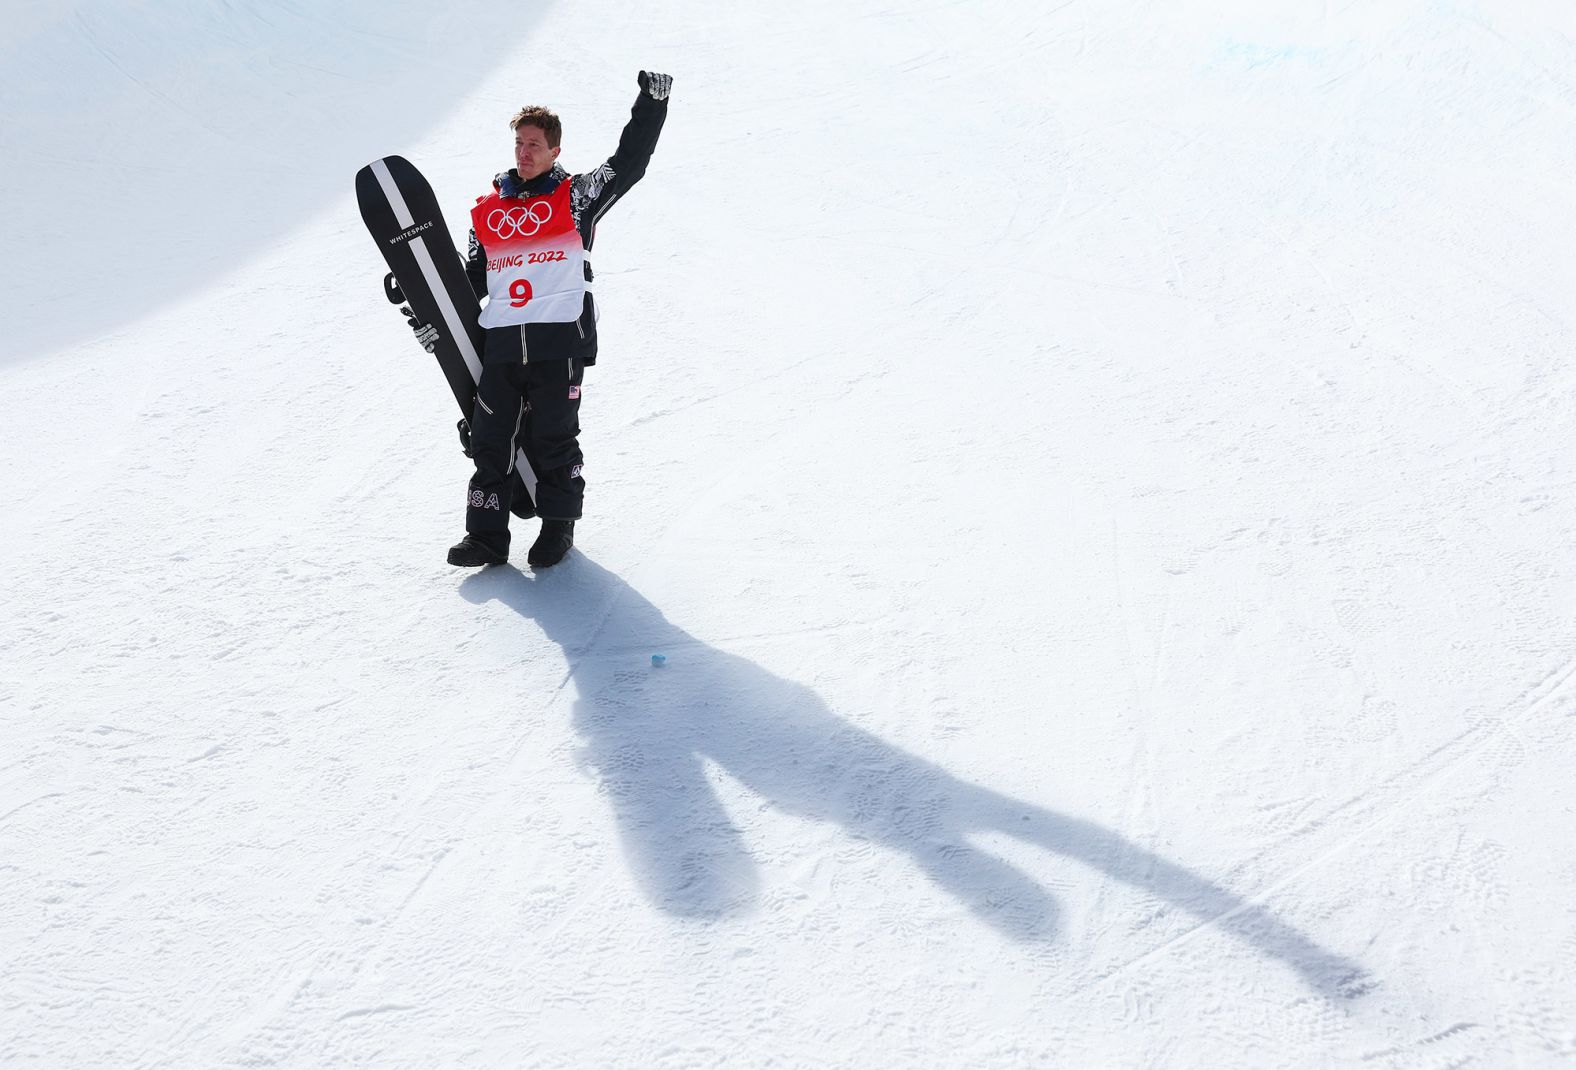 After falling on his third and final run in the halfpipe final, snowboarder <a href="index.php?page=&url=https%3A%2F%2Fwww.cnn.com%2F2022%2F02%2F08%2Fsport%2Fgallery%2Fshaun-white-snowboarder%2Findex.html" target="_blank">Shaun White</a> took off his helmet and waved goodbye to the crowd. He said going into Beijing that this would be his fifth and final Olympics.